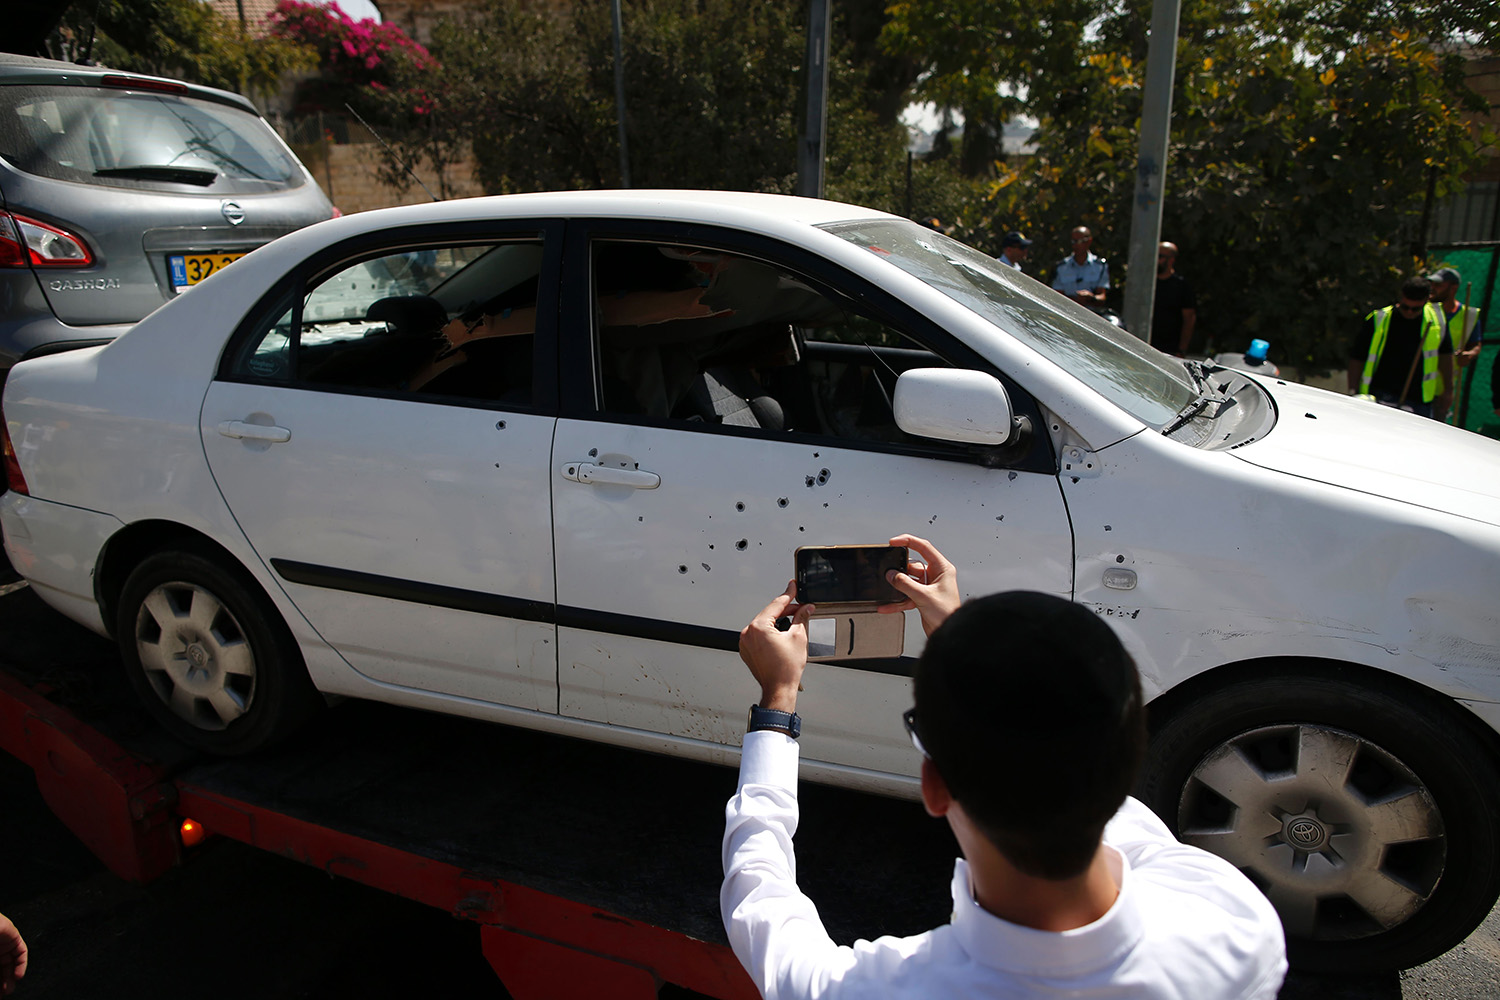 Man taking photos of a damaged car with his phone camera